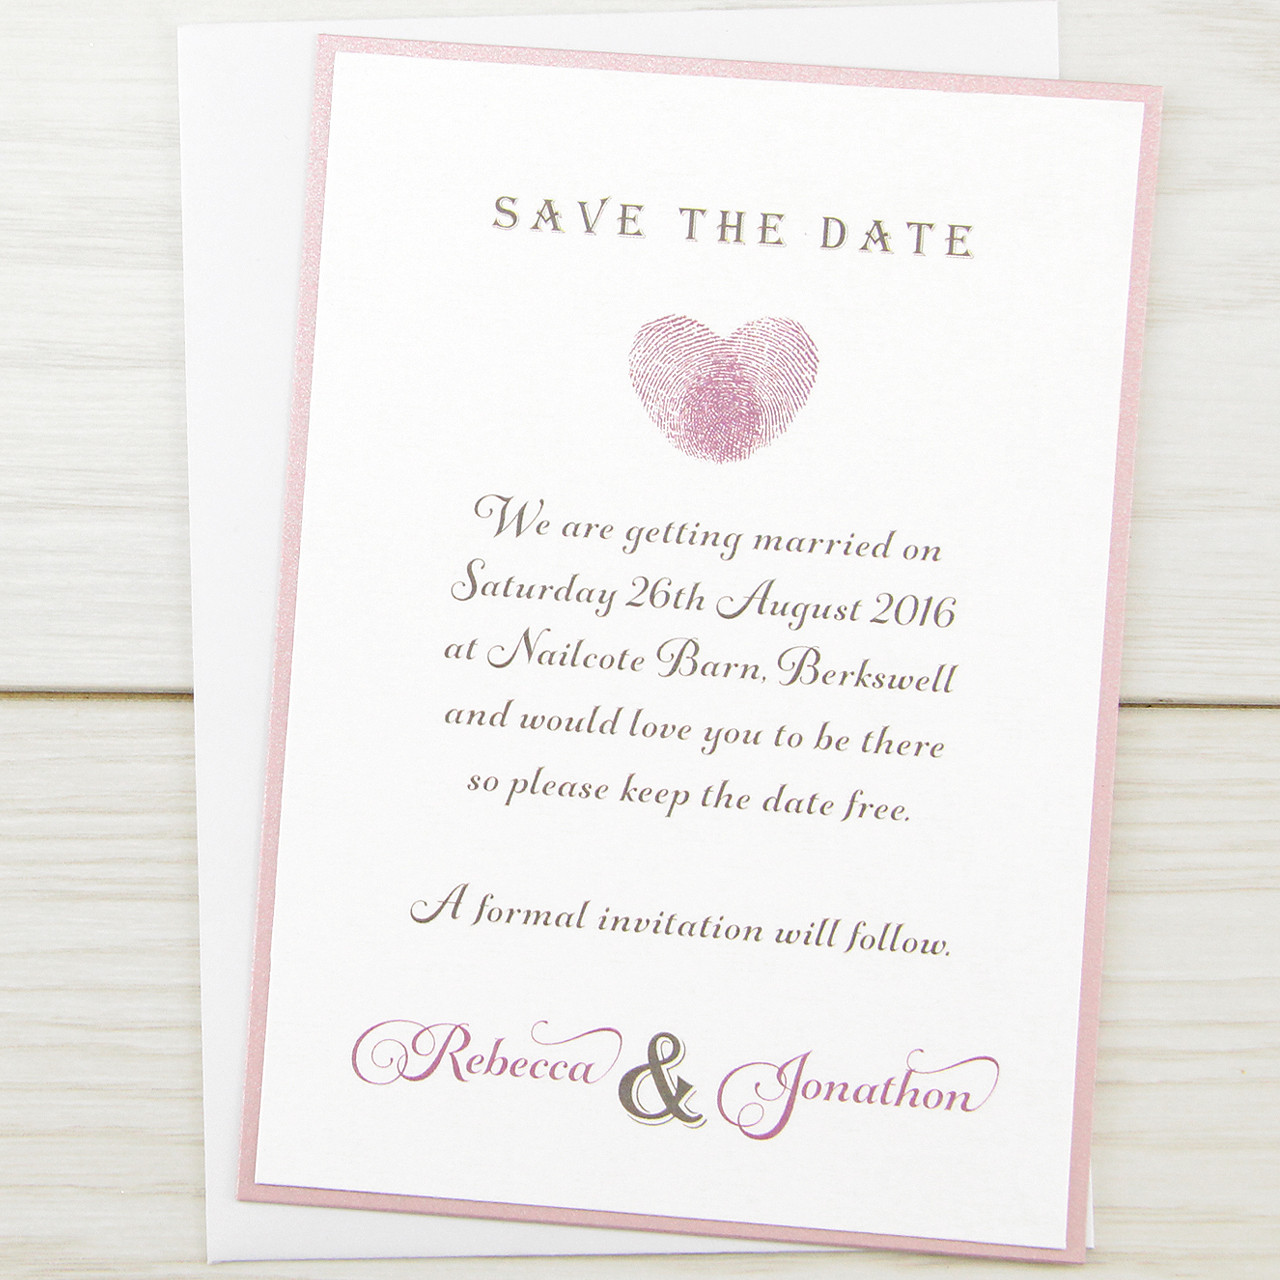 Save The Date And Wedding Invitations
 Thumb Print Save the Date